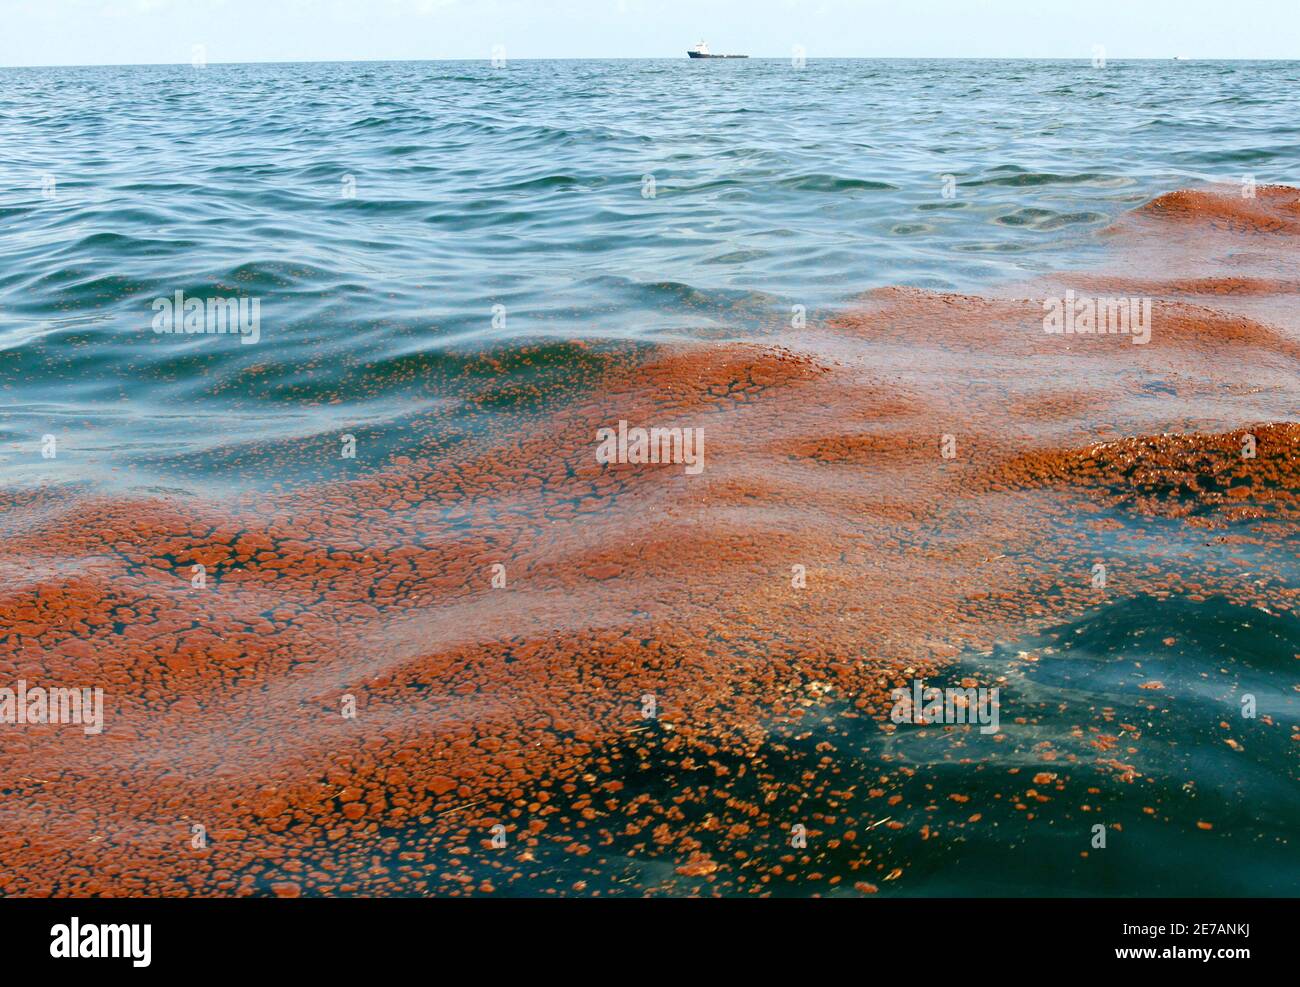 A band of oil floats in the water near Freemason Island from the BP oil spill off the coast of Louisiana May 7, 2010.    REUTERS/Rick Wilking (UNITED STATES - Tags: ENVIRONMENT DISASTER BUSINESS) Stock Photo